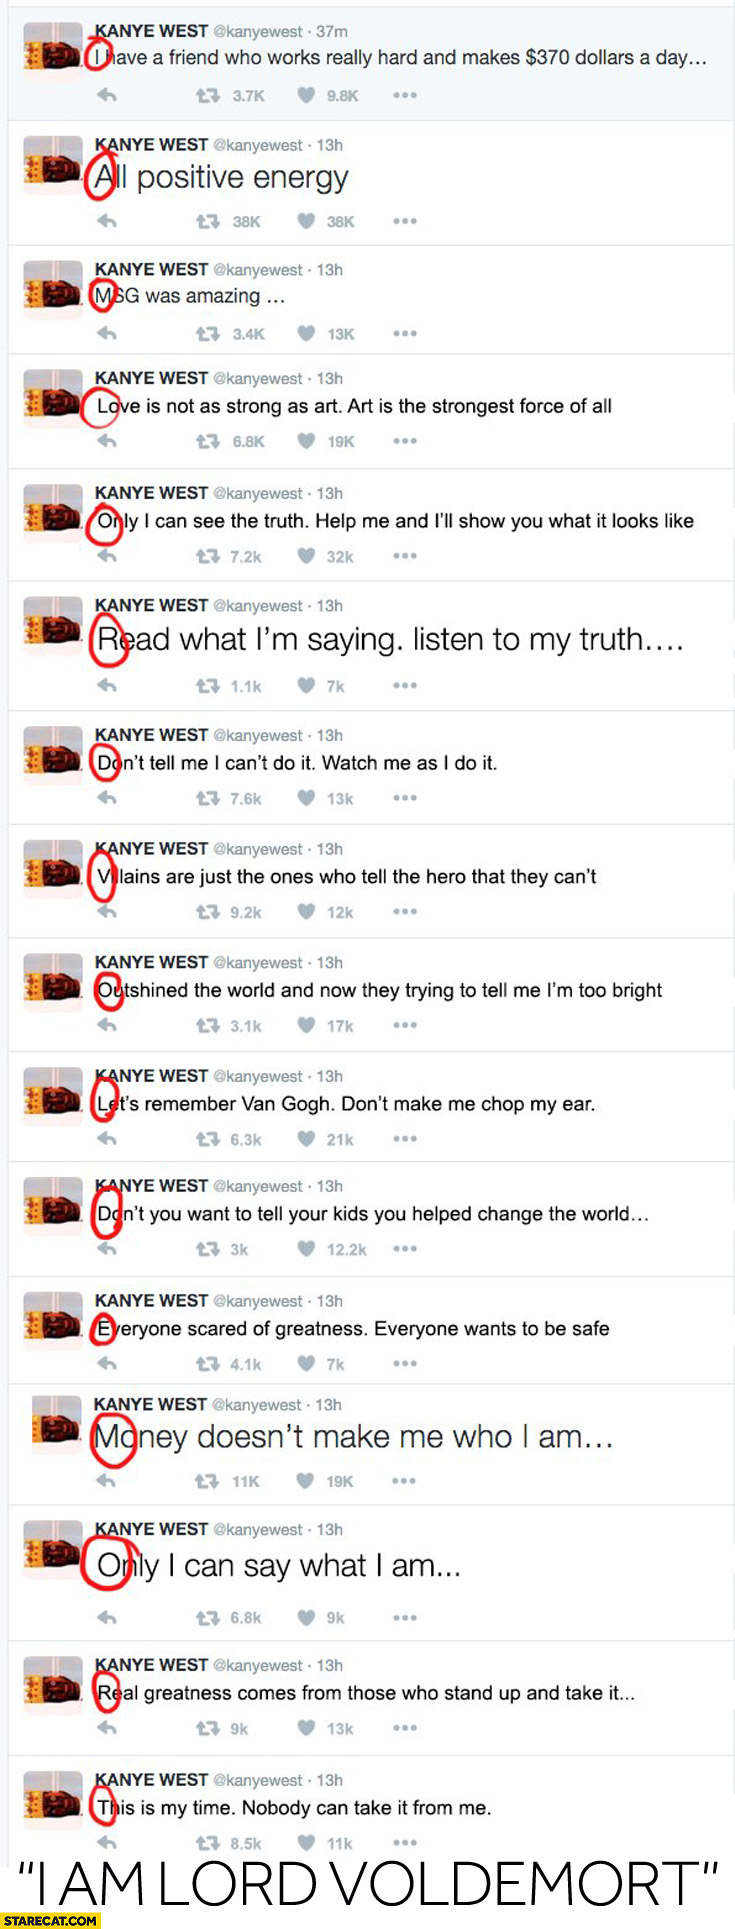 Kanye West on twitter “I am Lord Voldemort” first letters of tweets